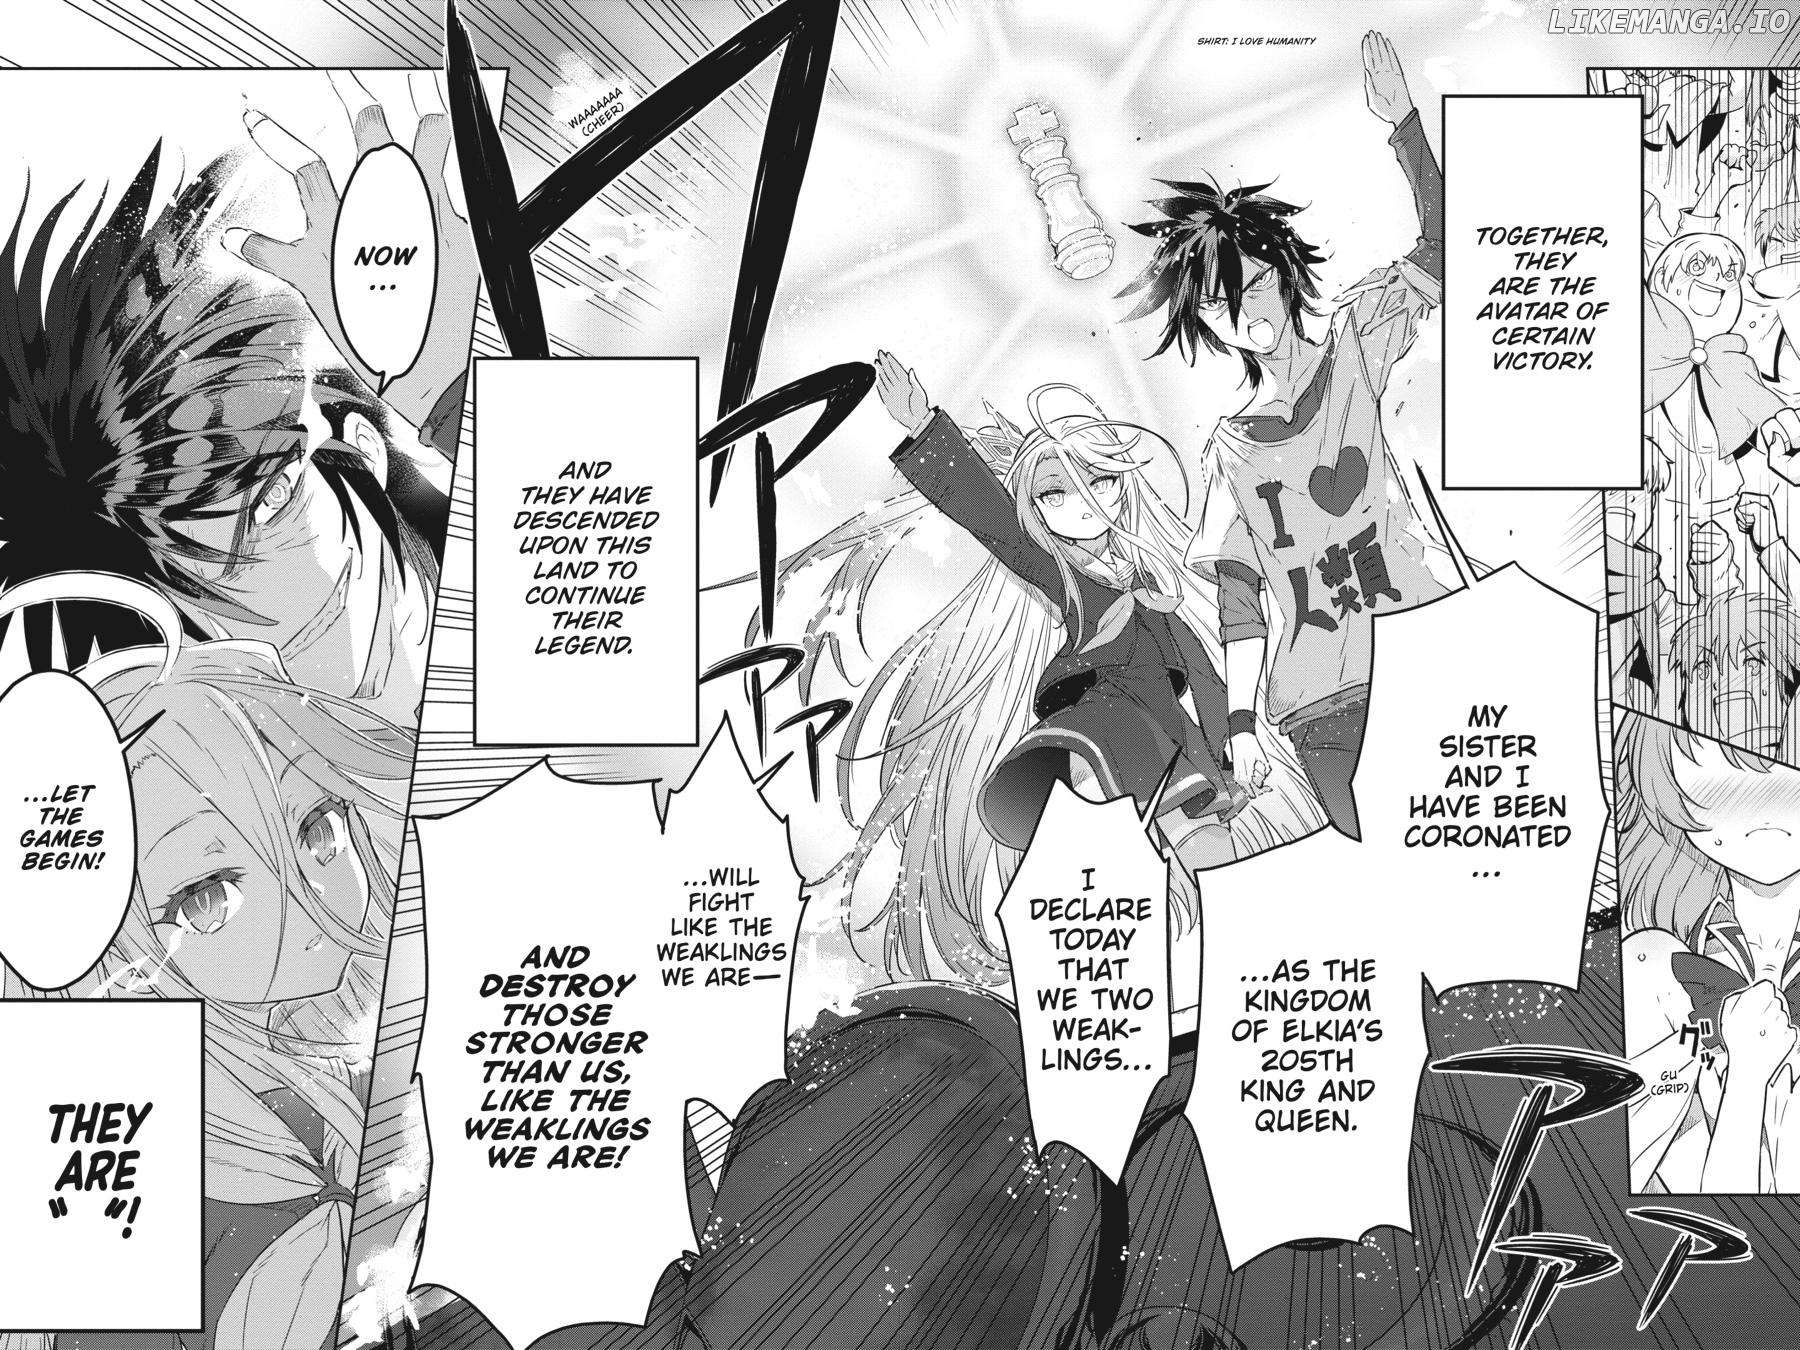 No Game No Life Chapter 2 - Eastern Union Arc Chapter 1 - page 10